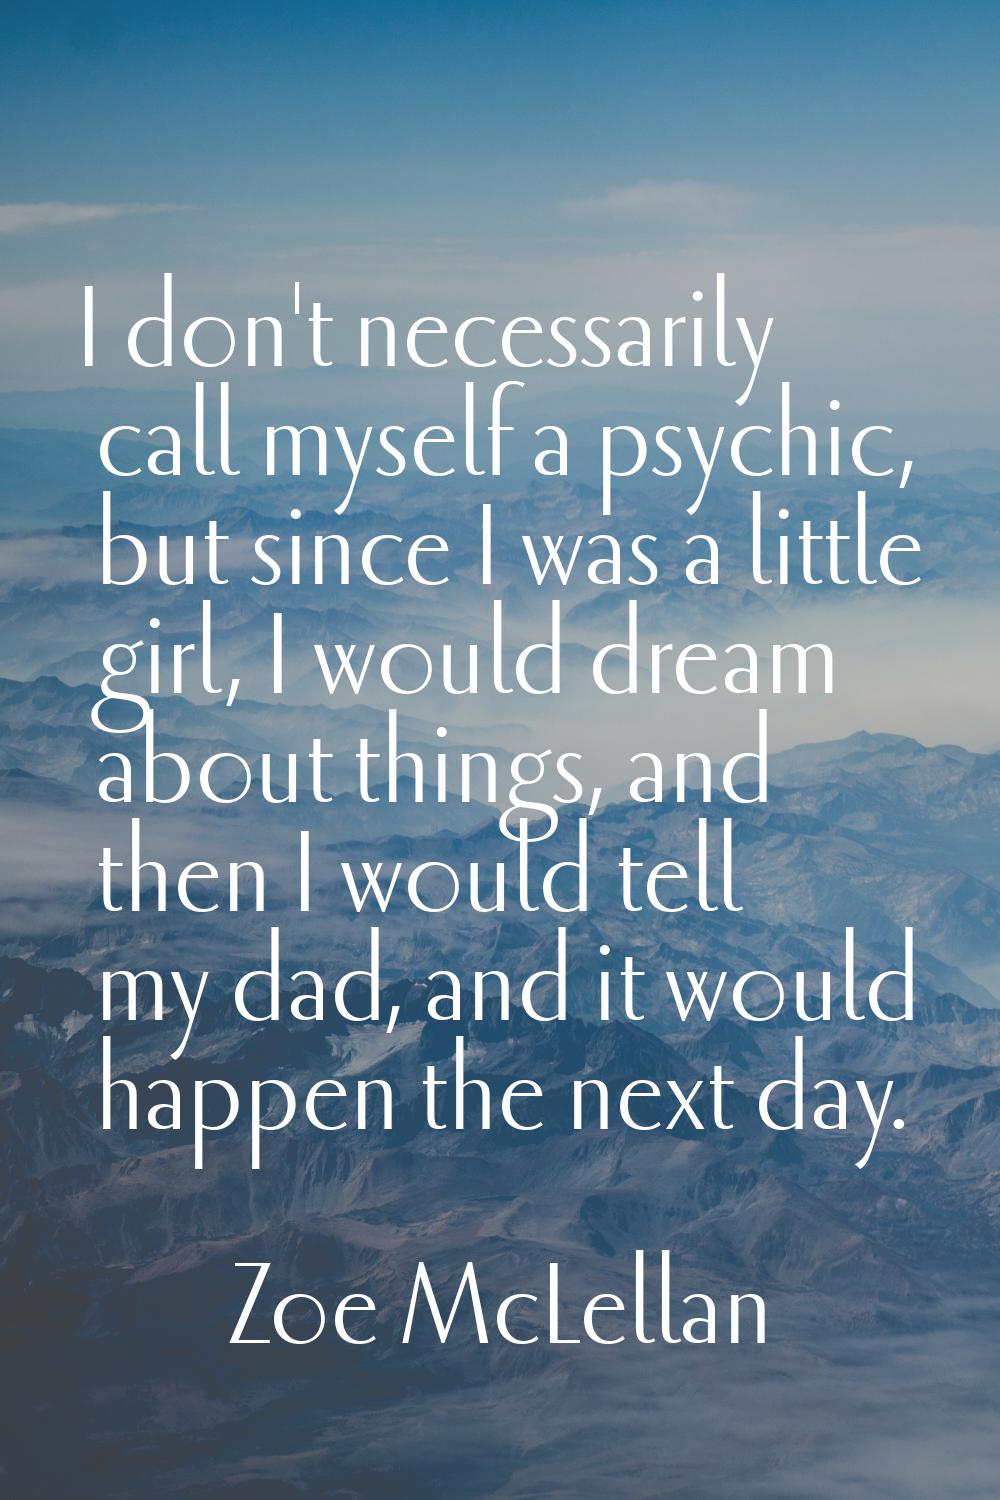 I don't necessarily call myself a psychic, but since I was a little girl, I would dream about thing